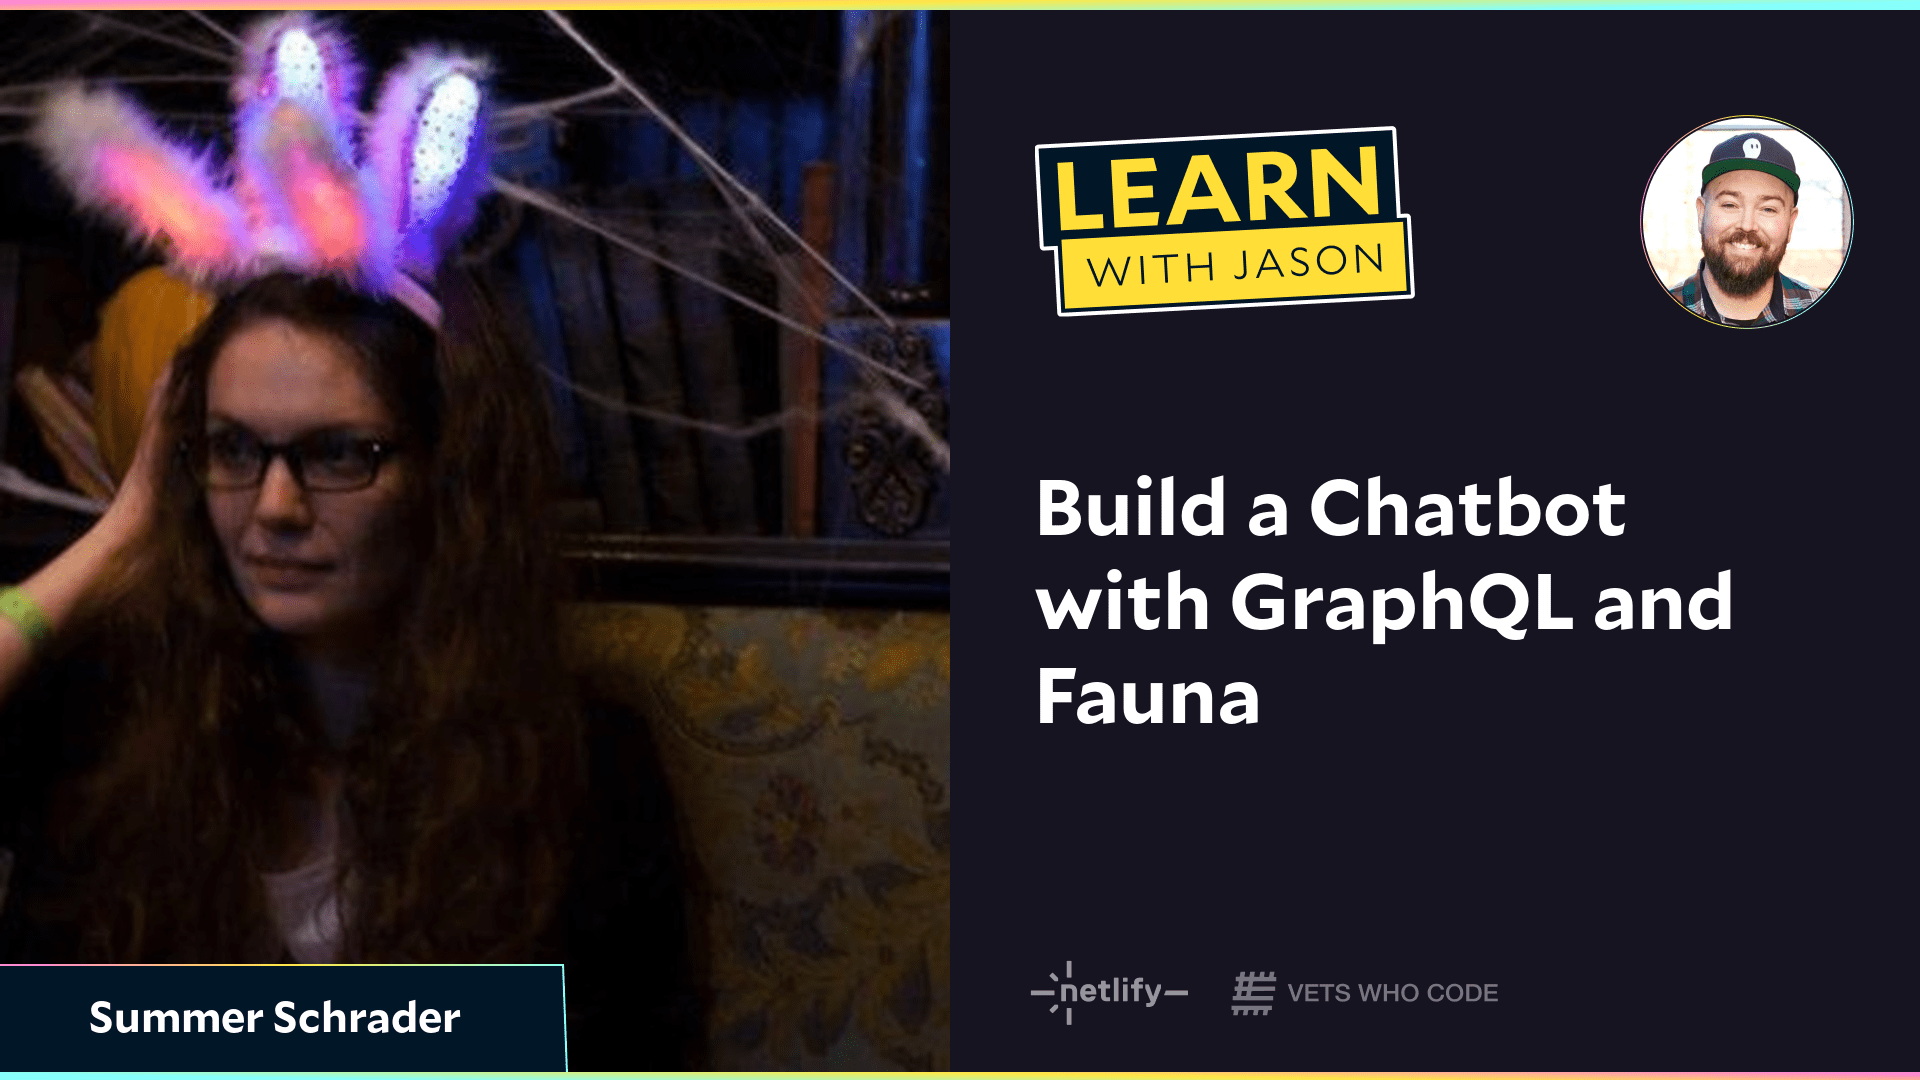 Build a Chatbot with GraphQL and Fauna (with Summer Schrader)